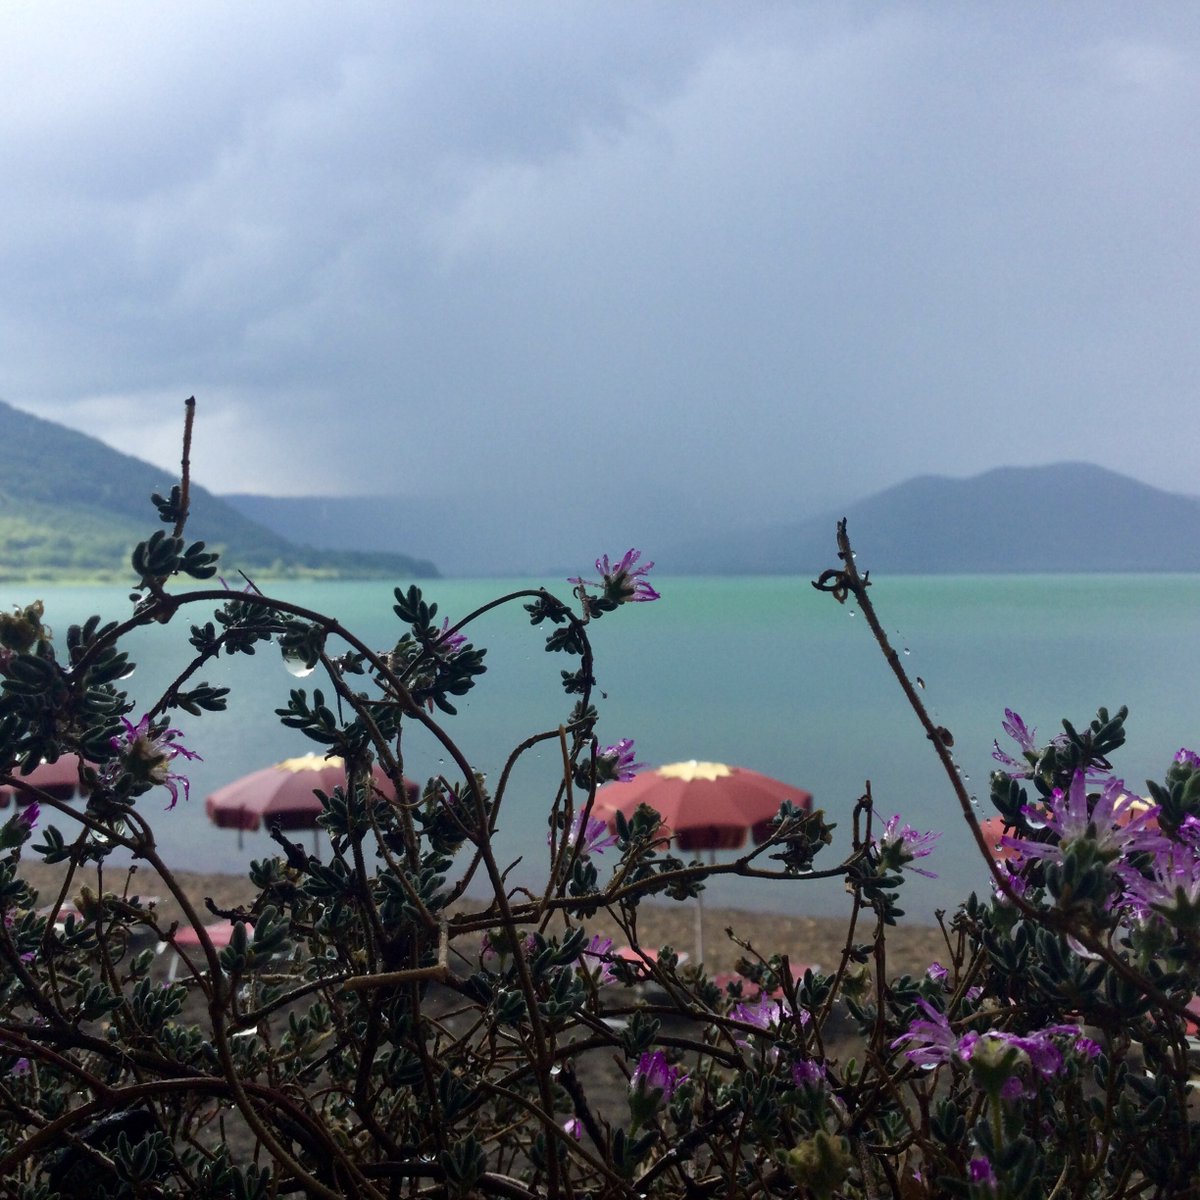 Lake Vico today after the thunderstorm...